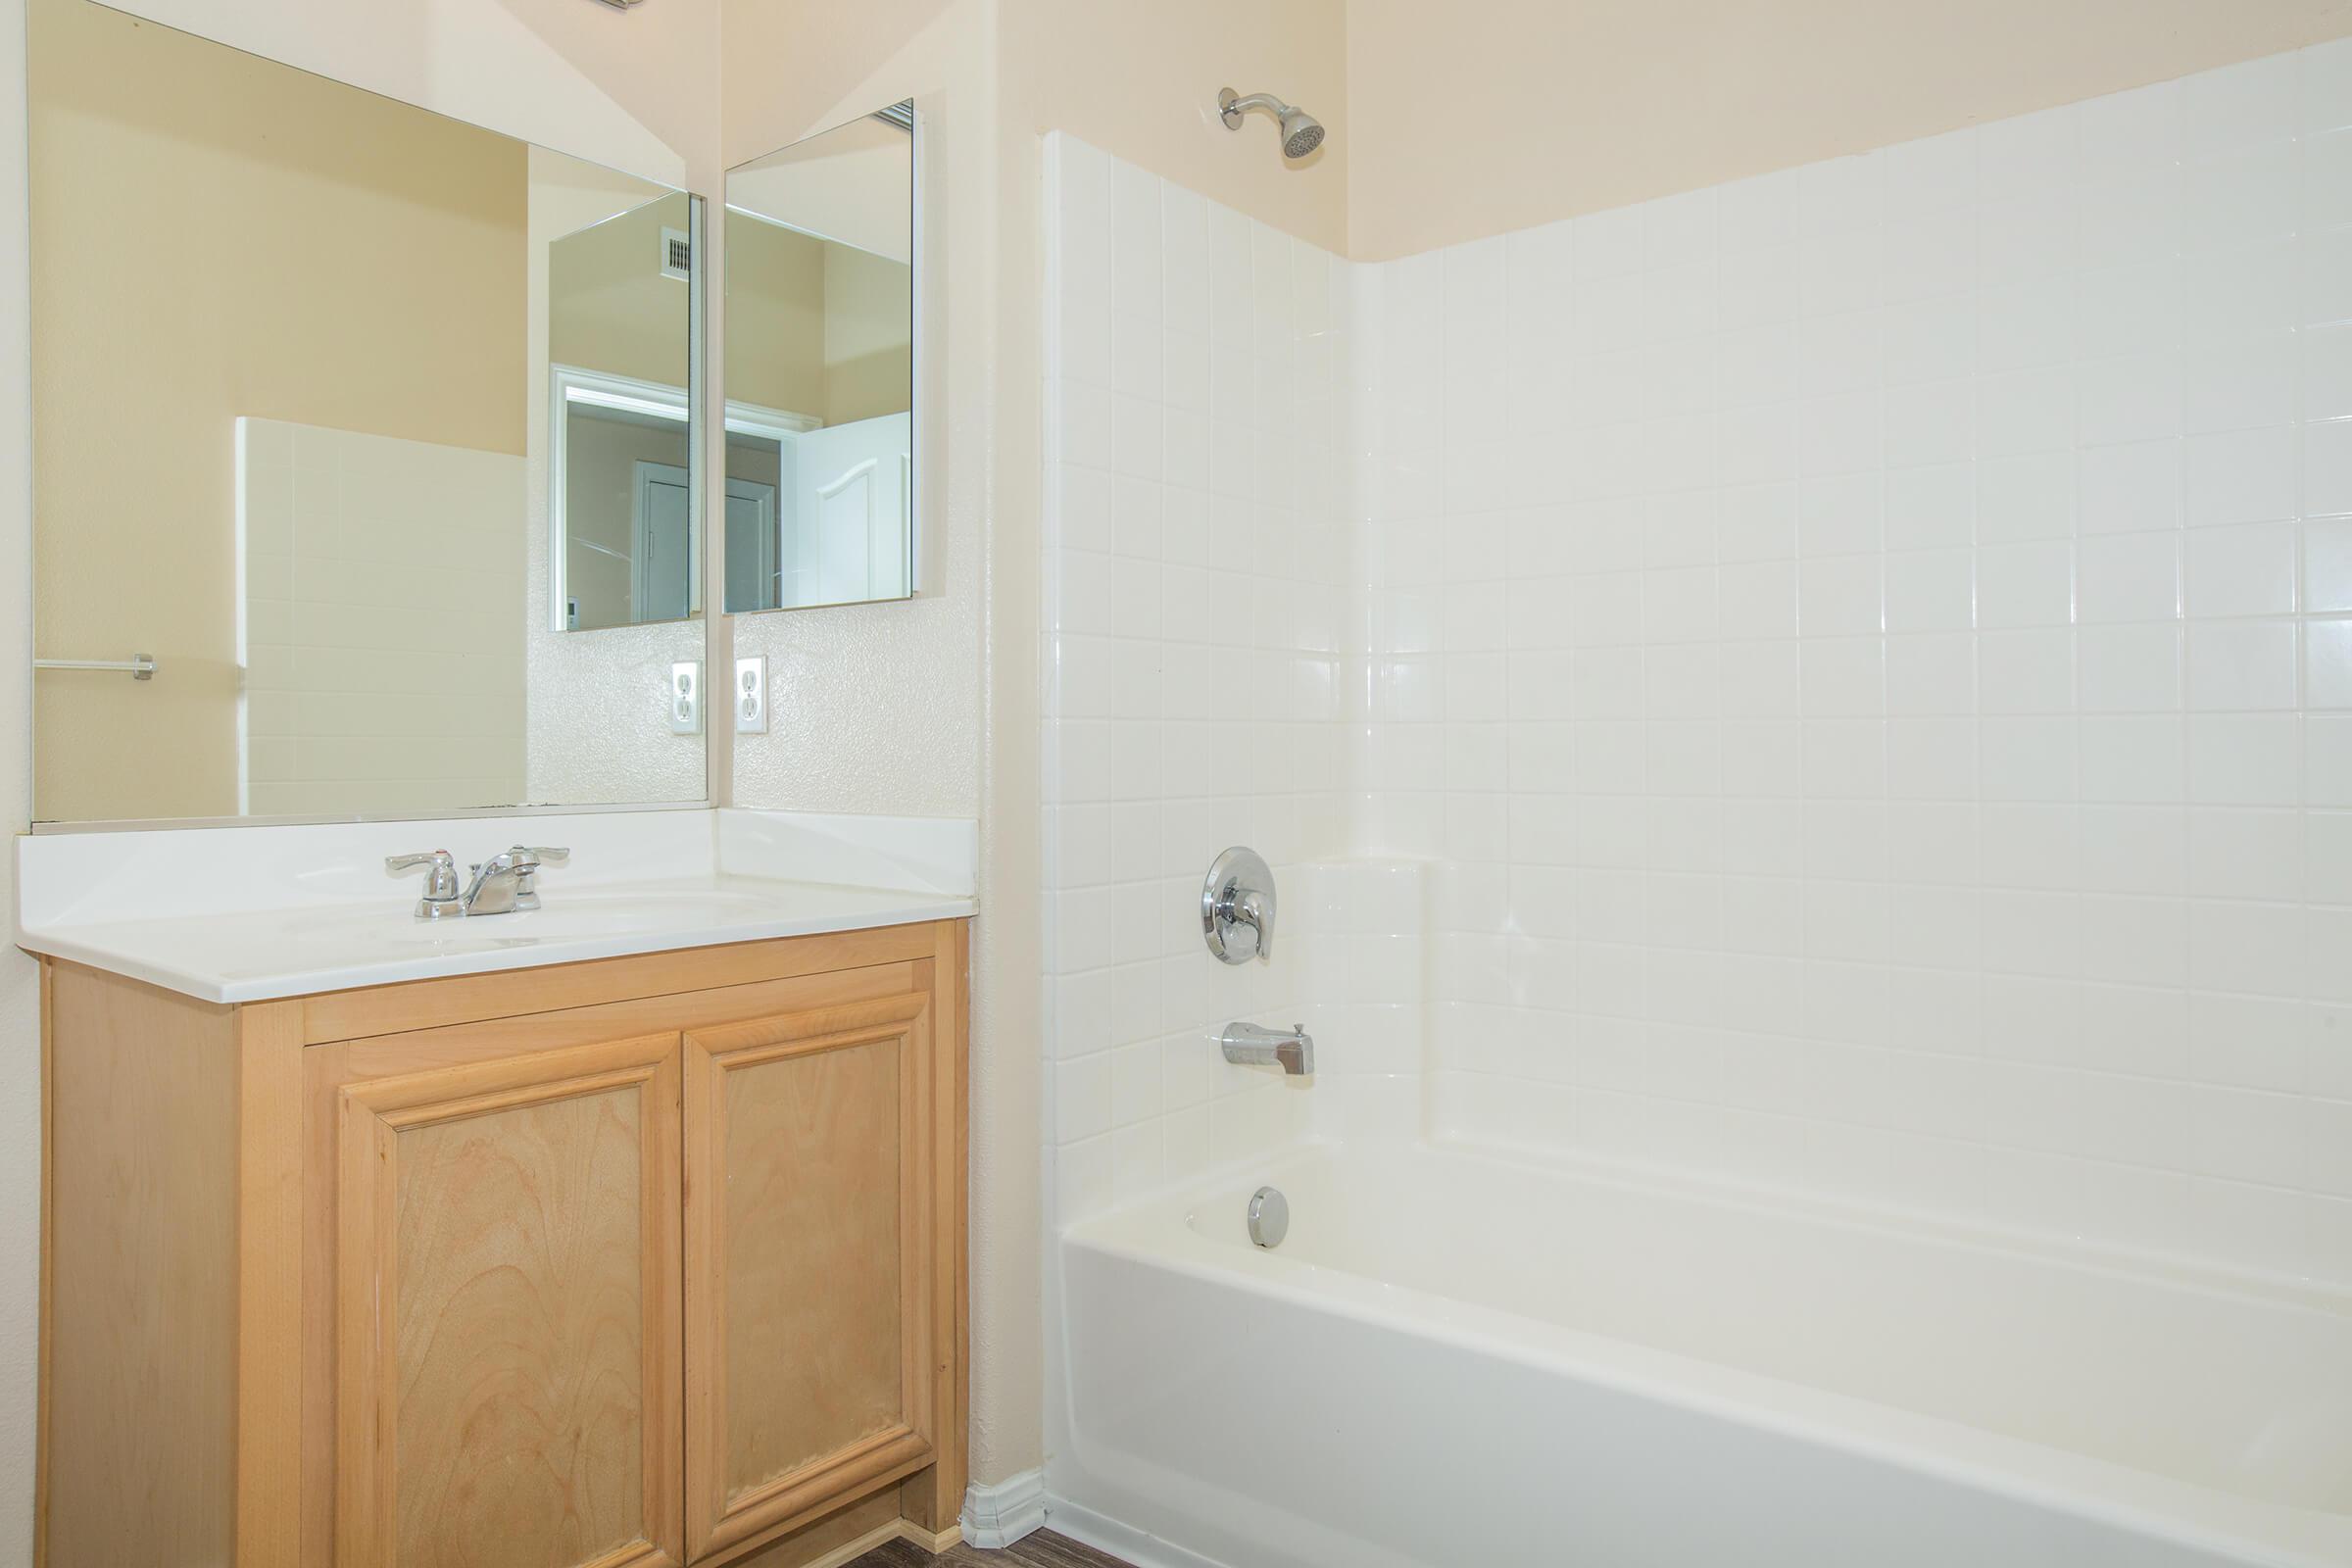 a large white tub next to a shower